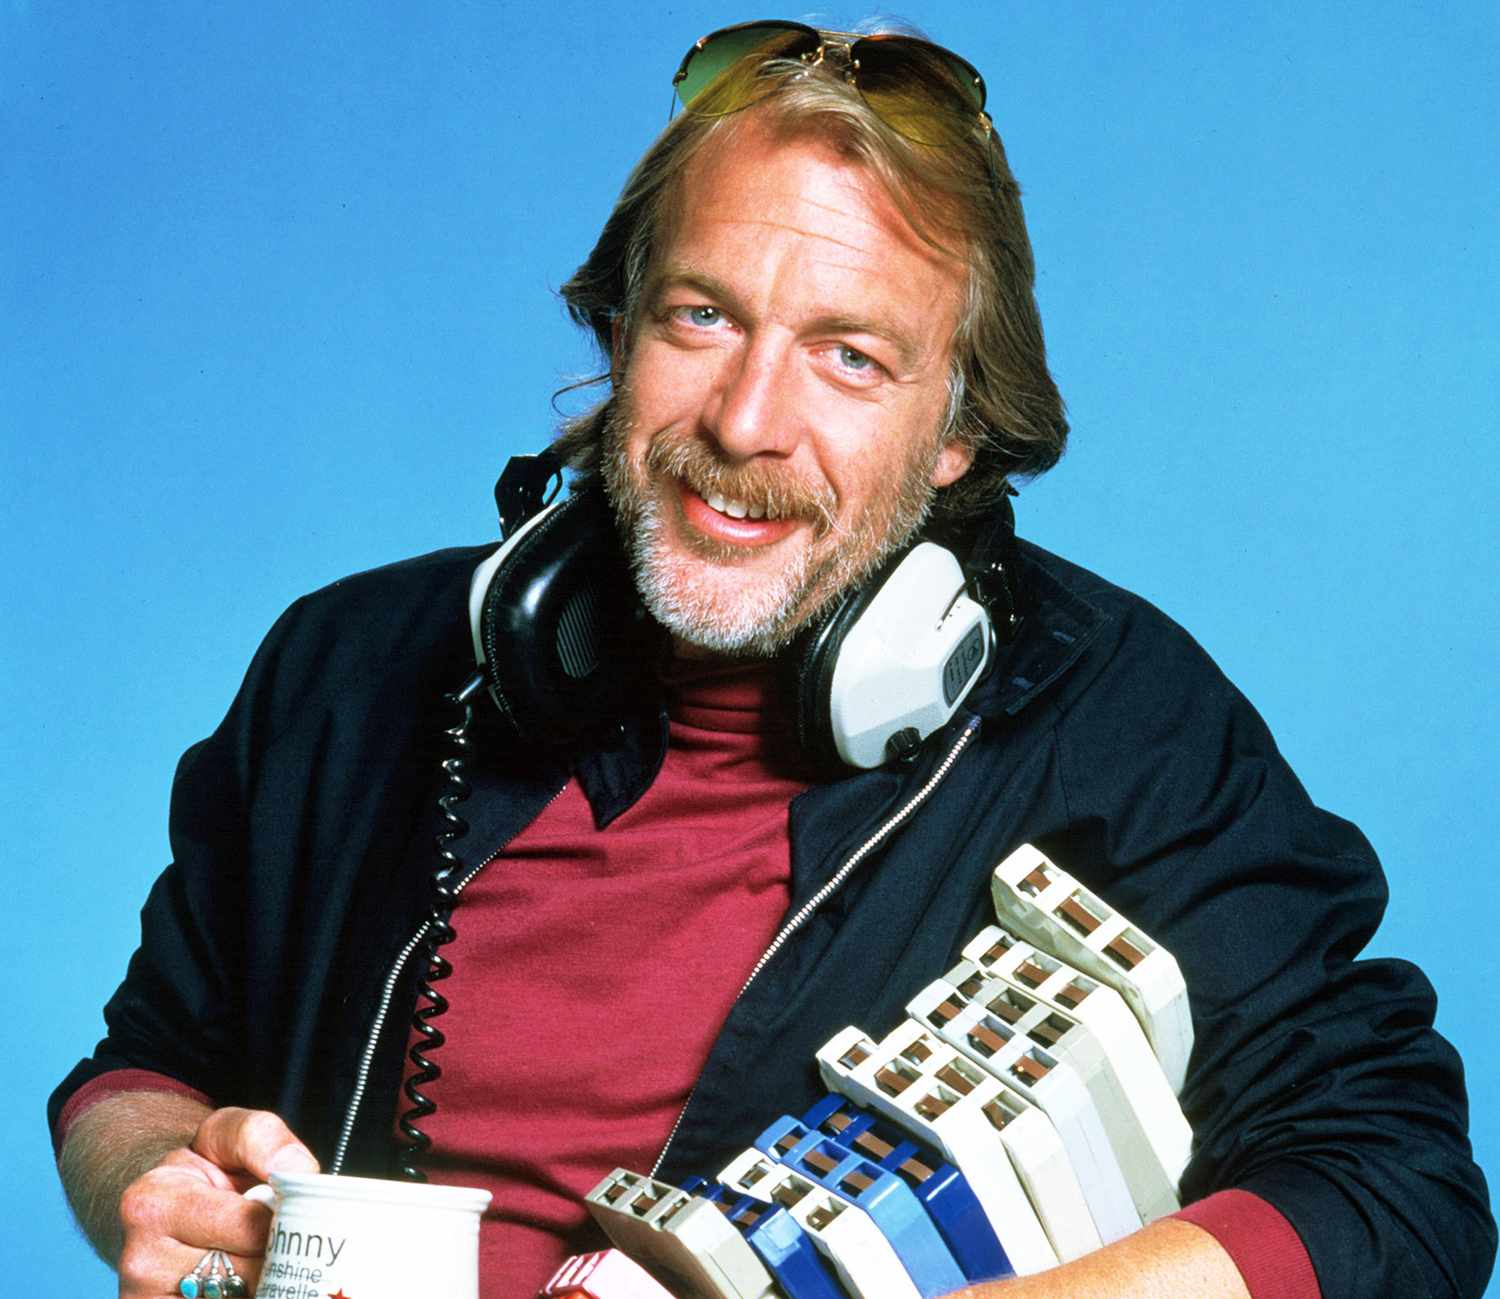 Howard Hesseman, best known for portraying Dr. Johnny Fever on WKRP in Cinc...